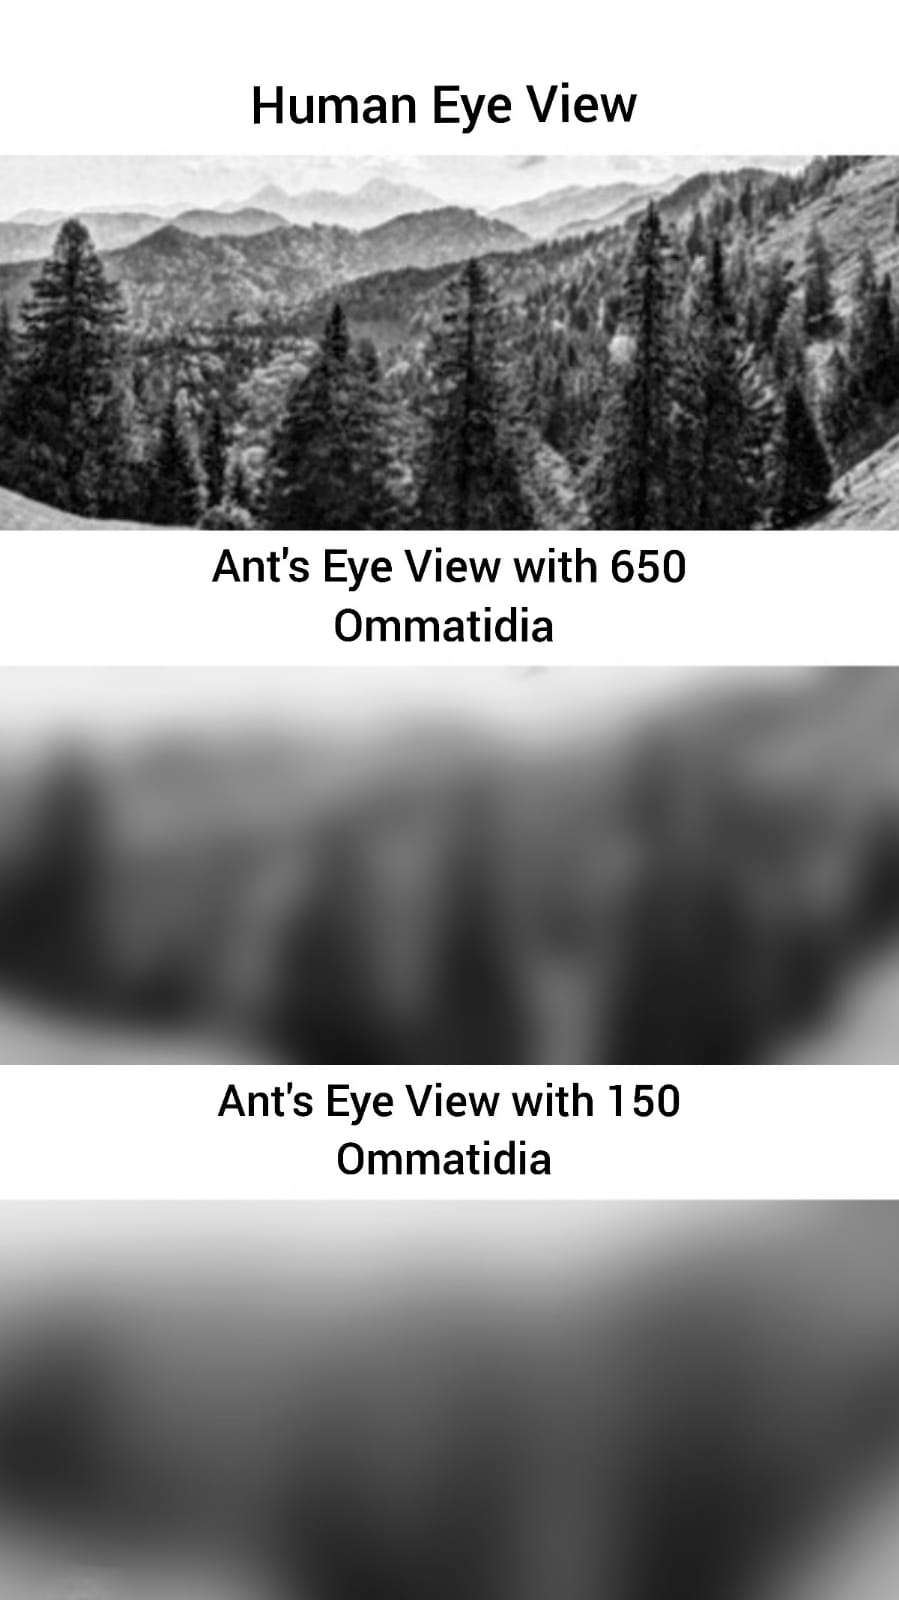 How do Ants see